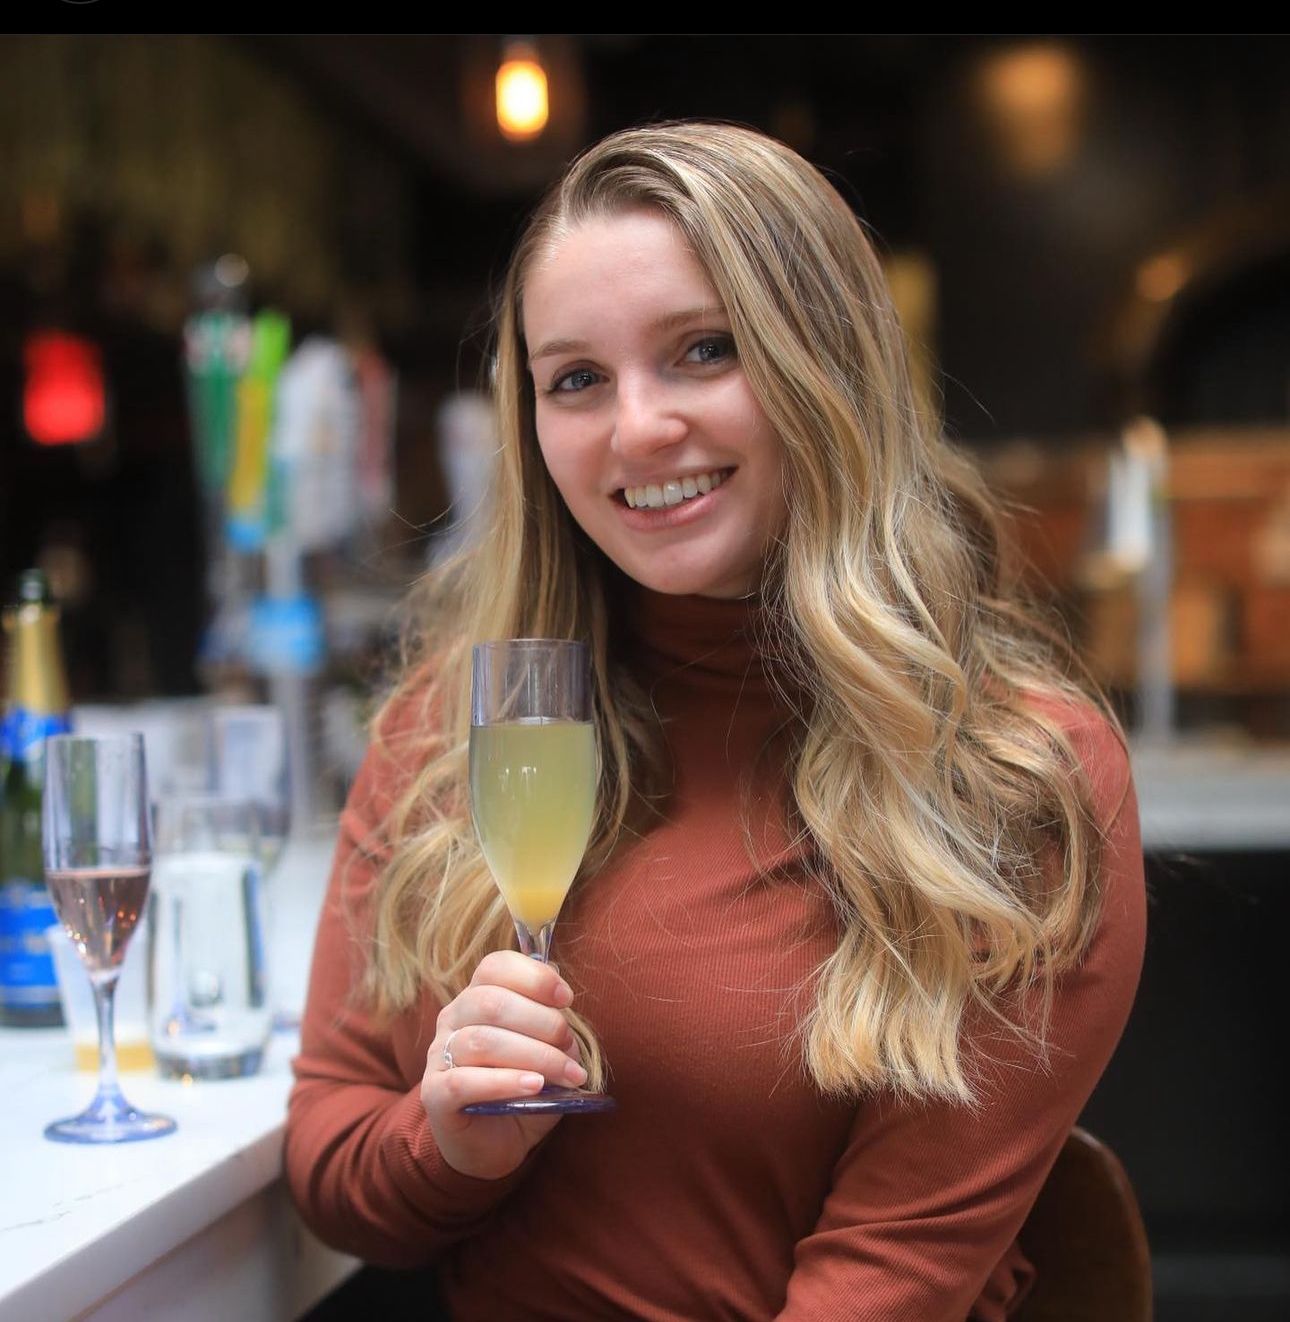 A woman is holding a glass of wine and smiling